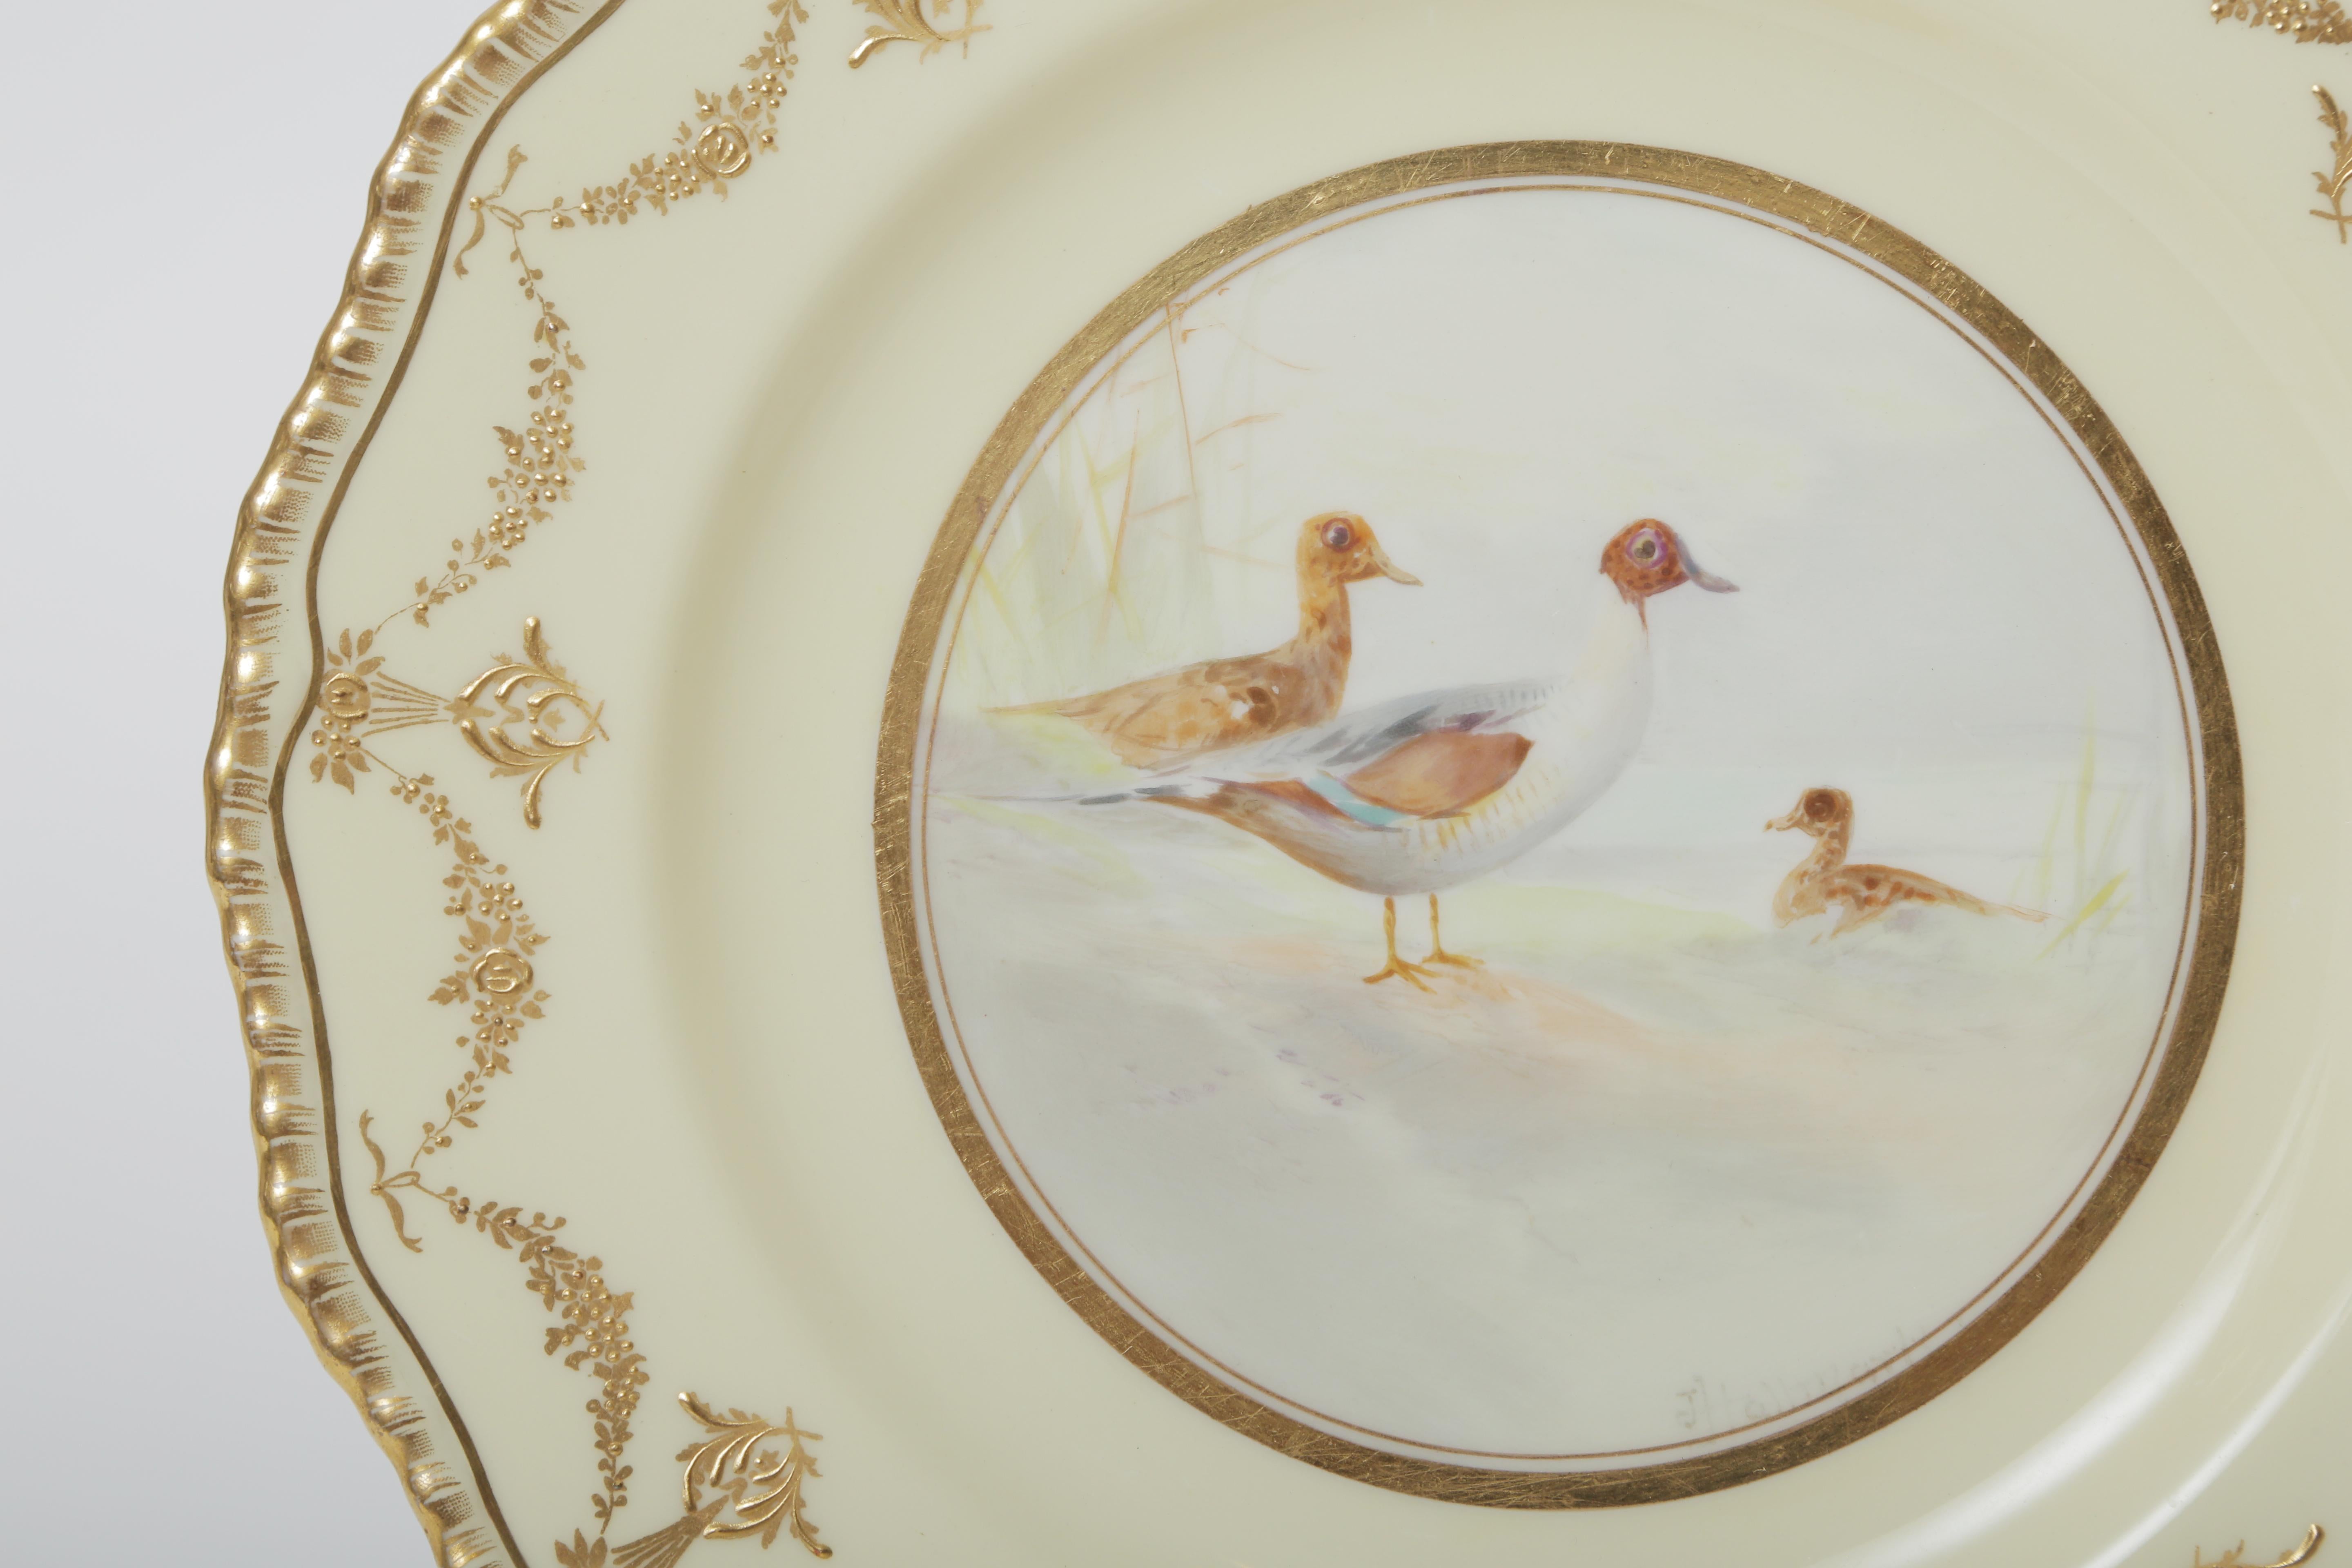 Hand-Crafted Ten Hand Painted Game Bird Plates, Raised Gold Accents, Antique English